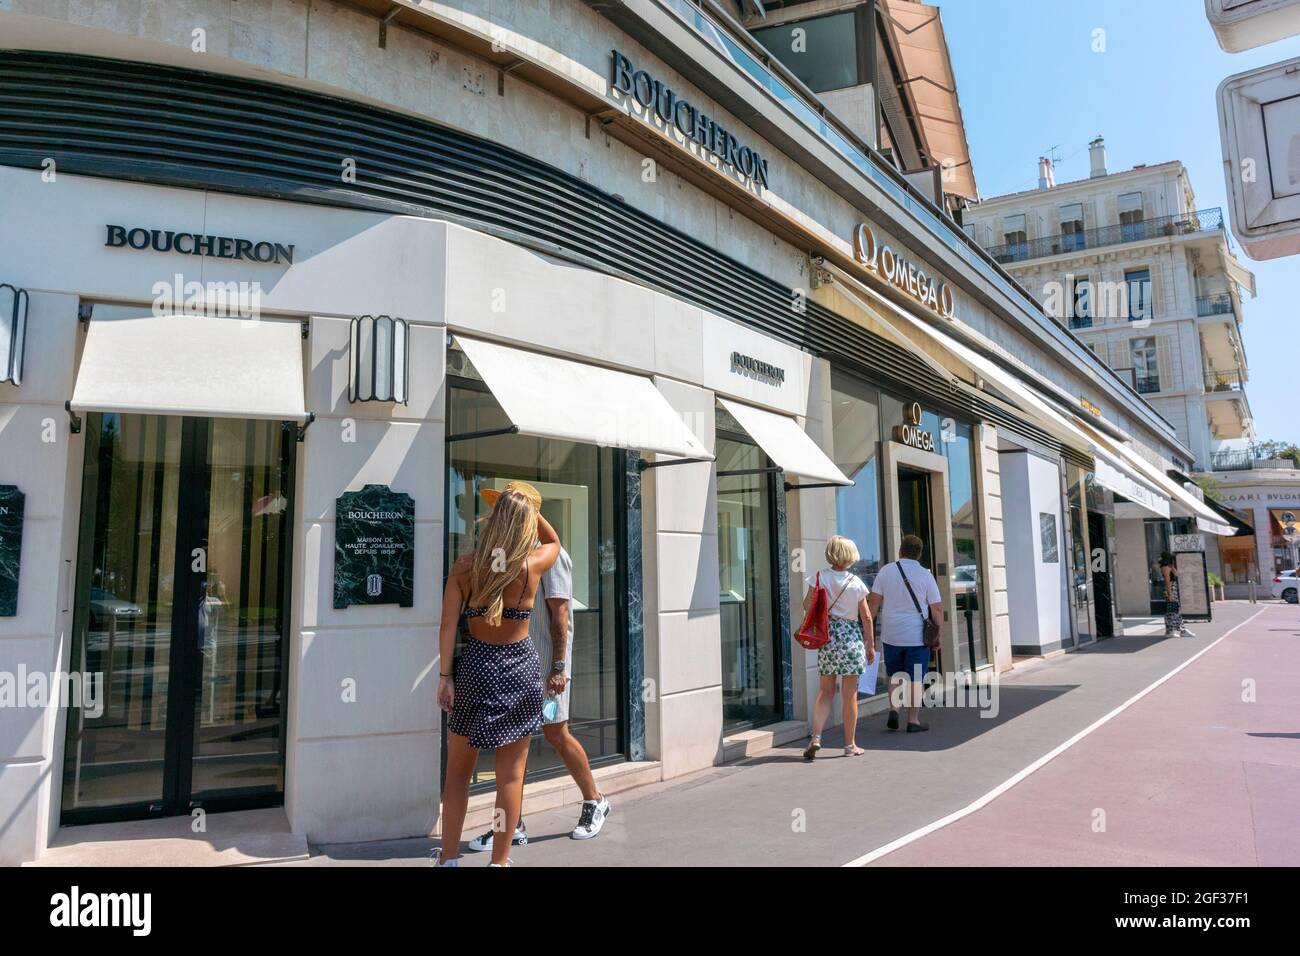 Cannes, France, Street Scenes, People Shopping, Luxury Jewelry Stores,  Summer Croisette, Boucheron Shop Front, Prestige consumer Stock Photo -  Alamy